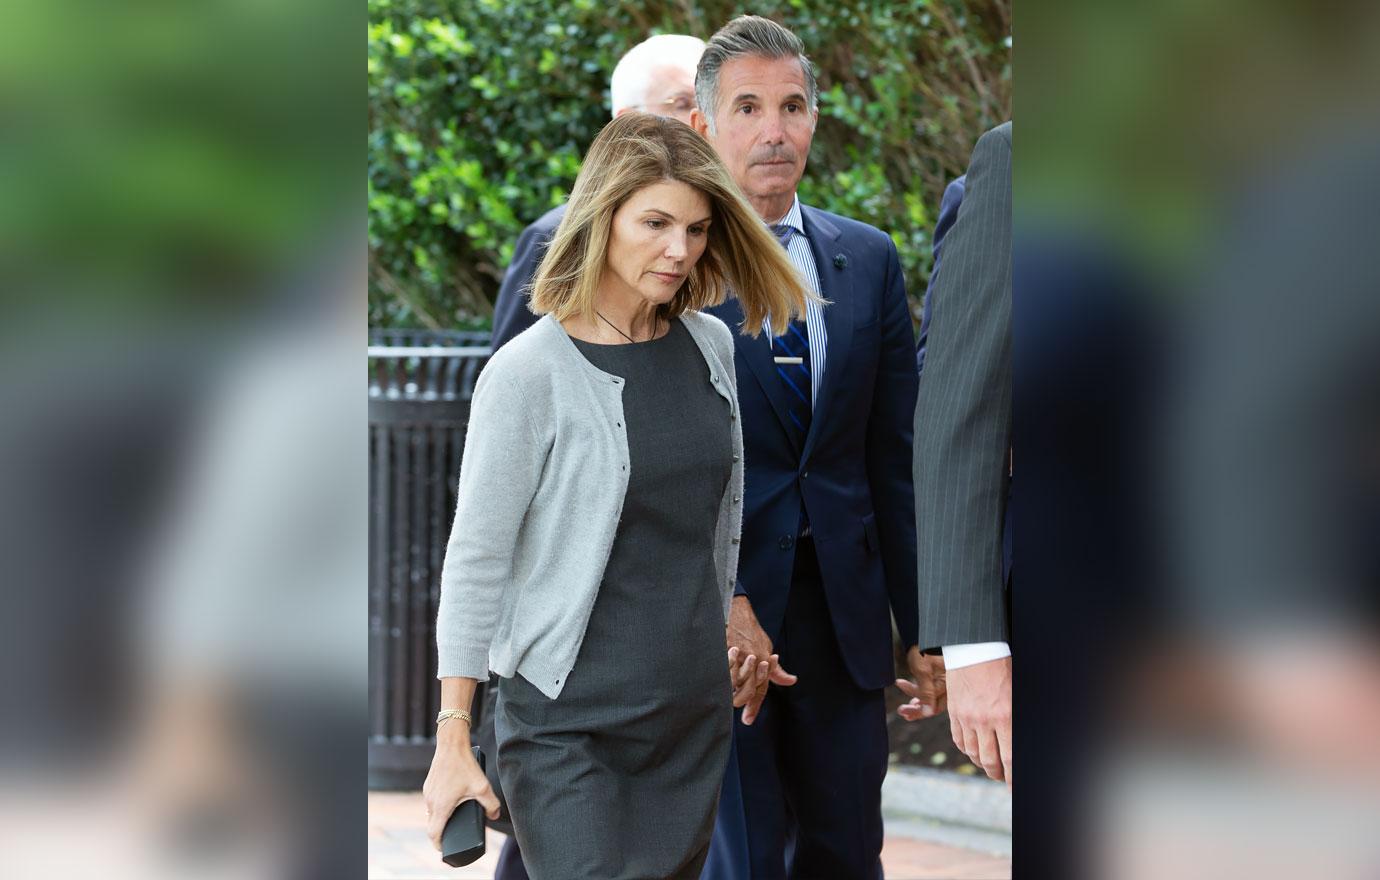 Lori Loughlin Returns to TV in When Hope Calls: A Country Christmas